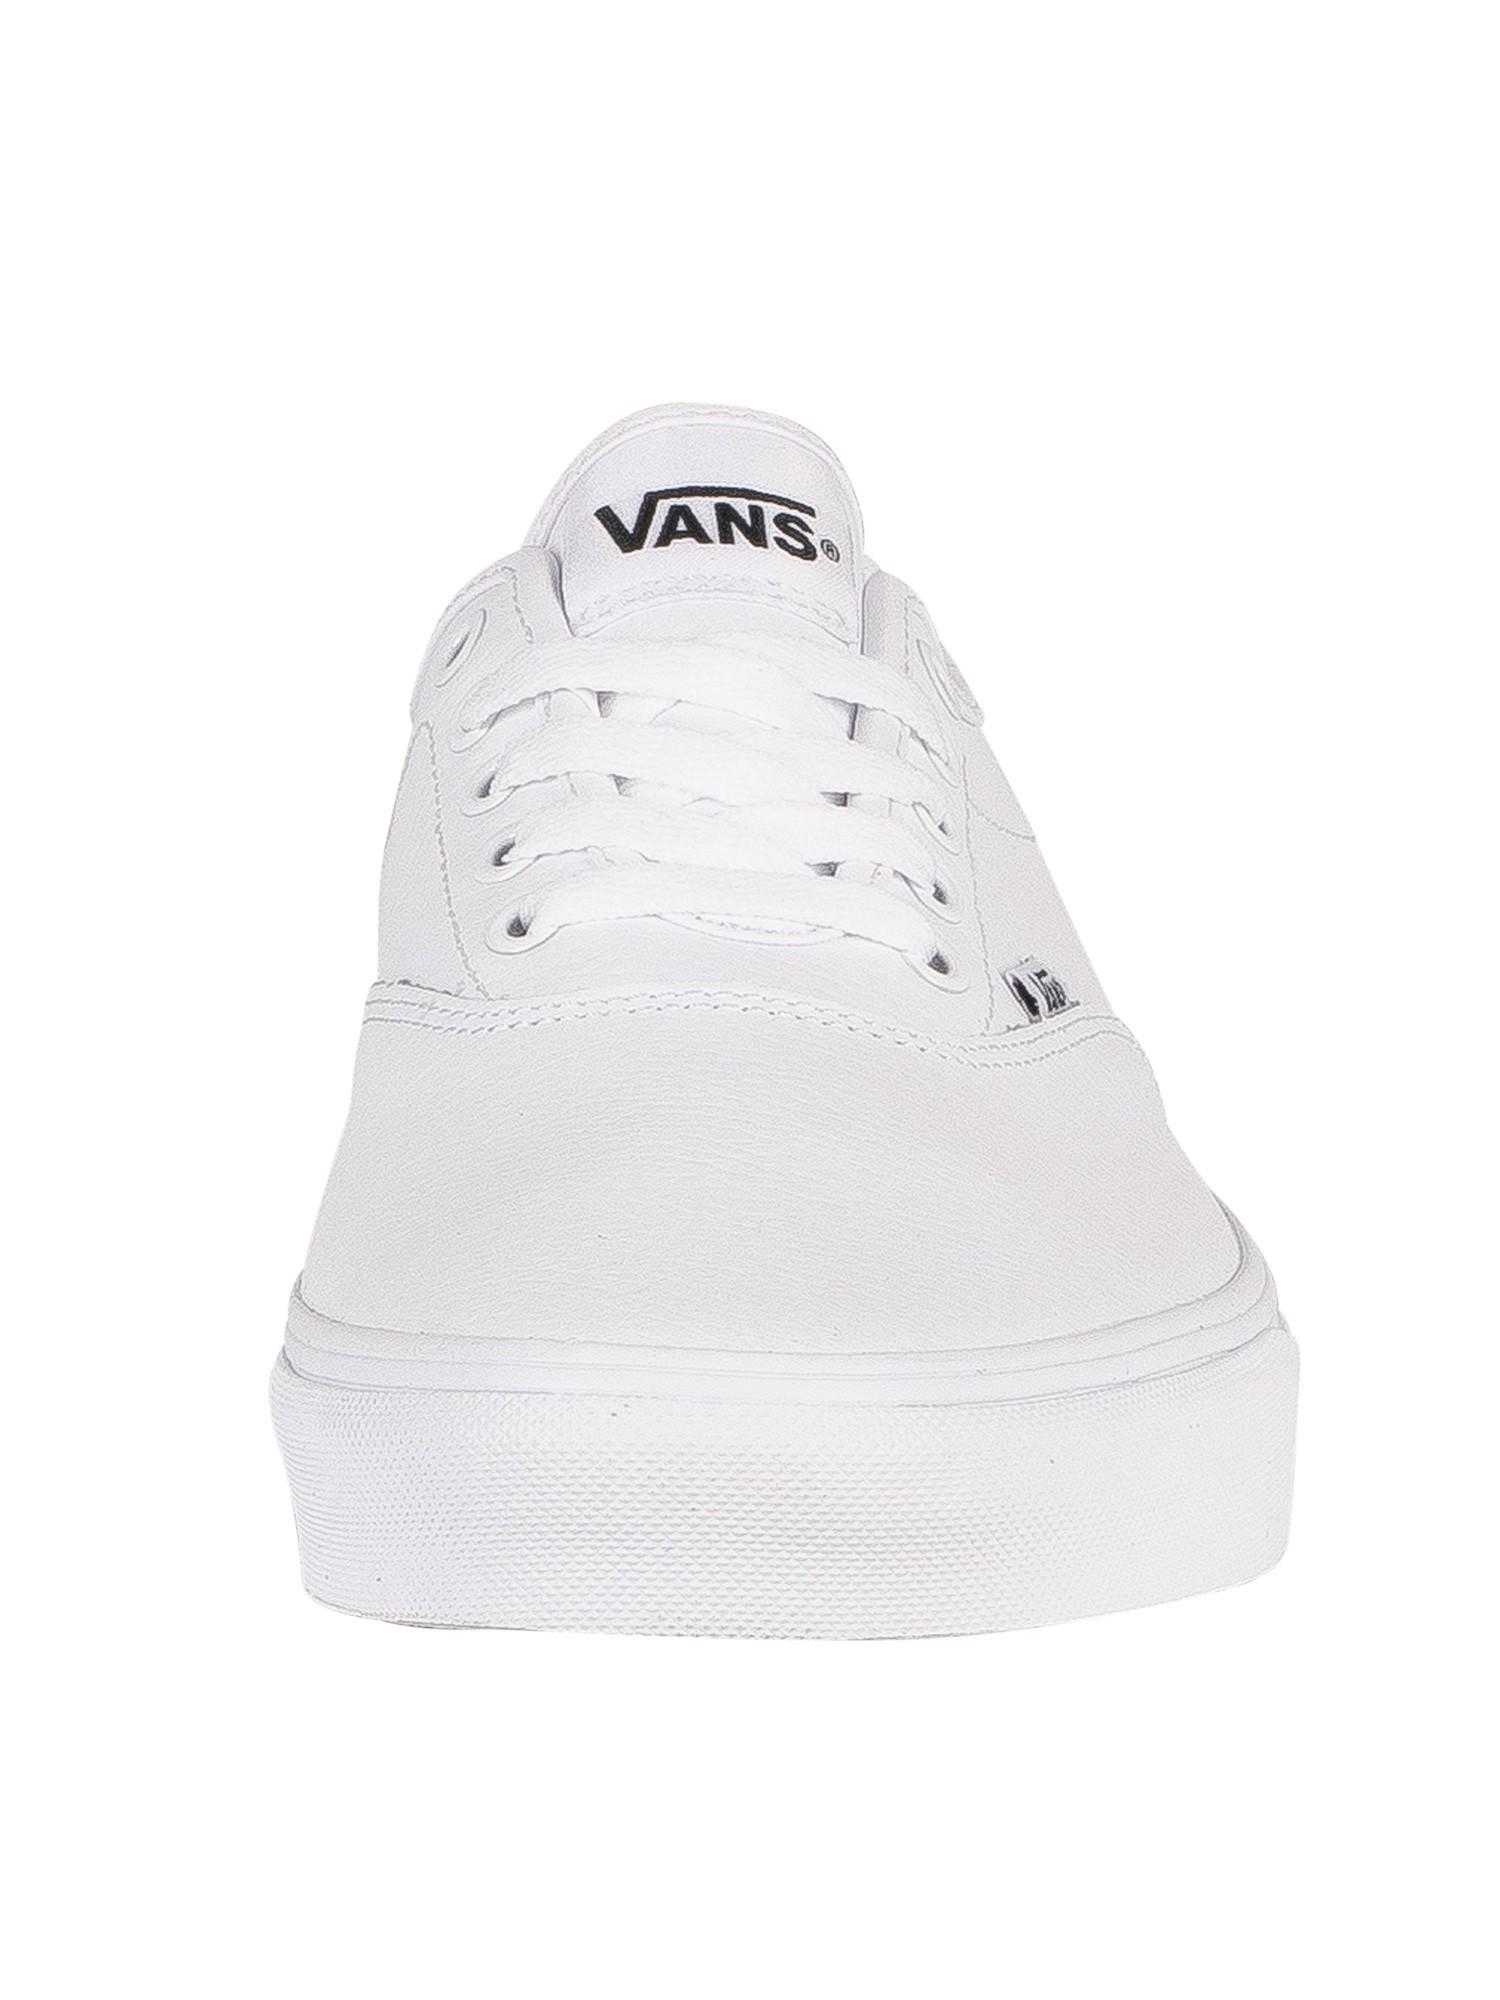 Vans Doheny Decon Tumble Leather Trainers in White/White (White) for Men |  Lyst